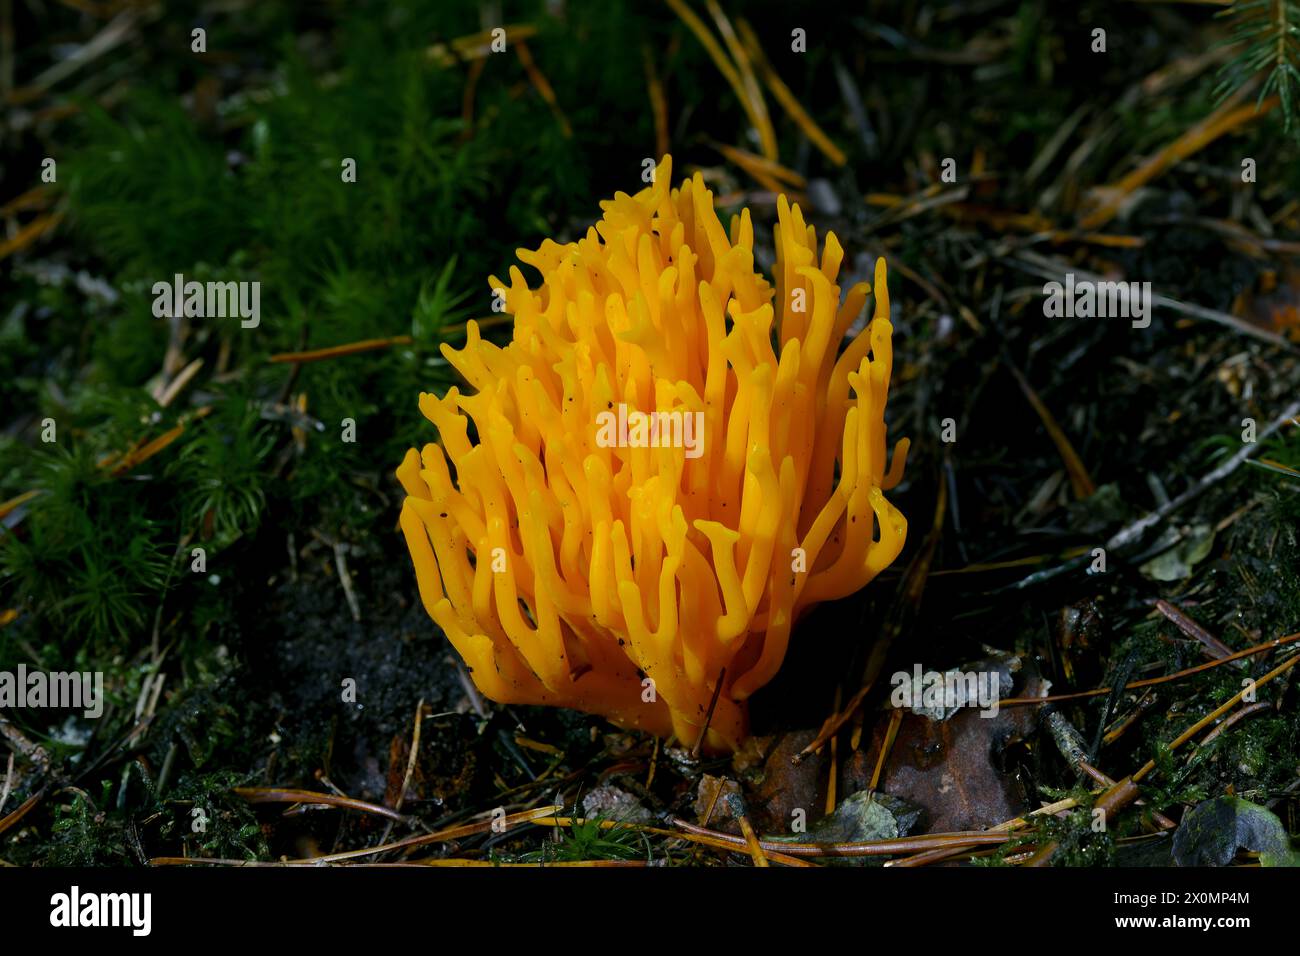 A yellow coral fungus, resembling a terrestrial plant, emerges from the ground in a natural landscape. This unique fungus adds to the diverse wildlife Stock Photo